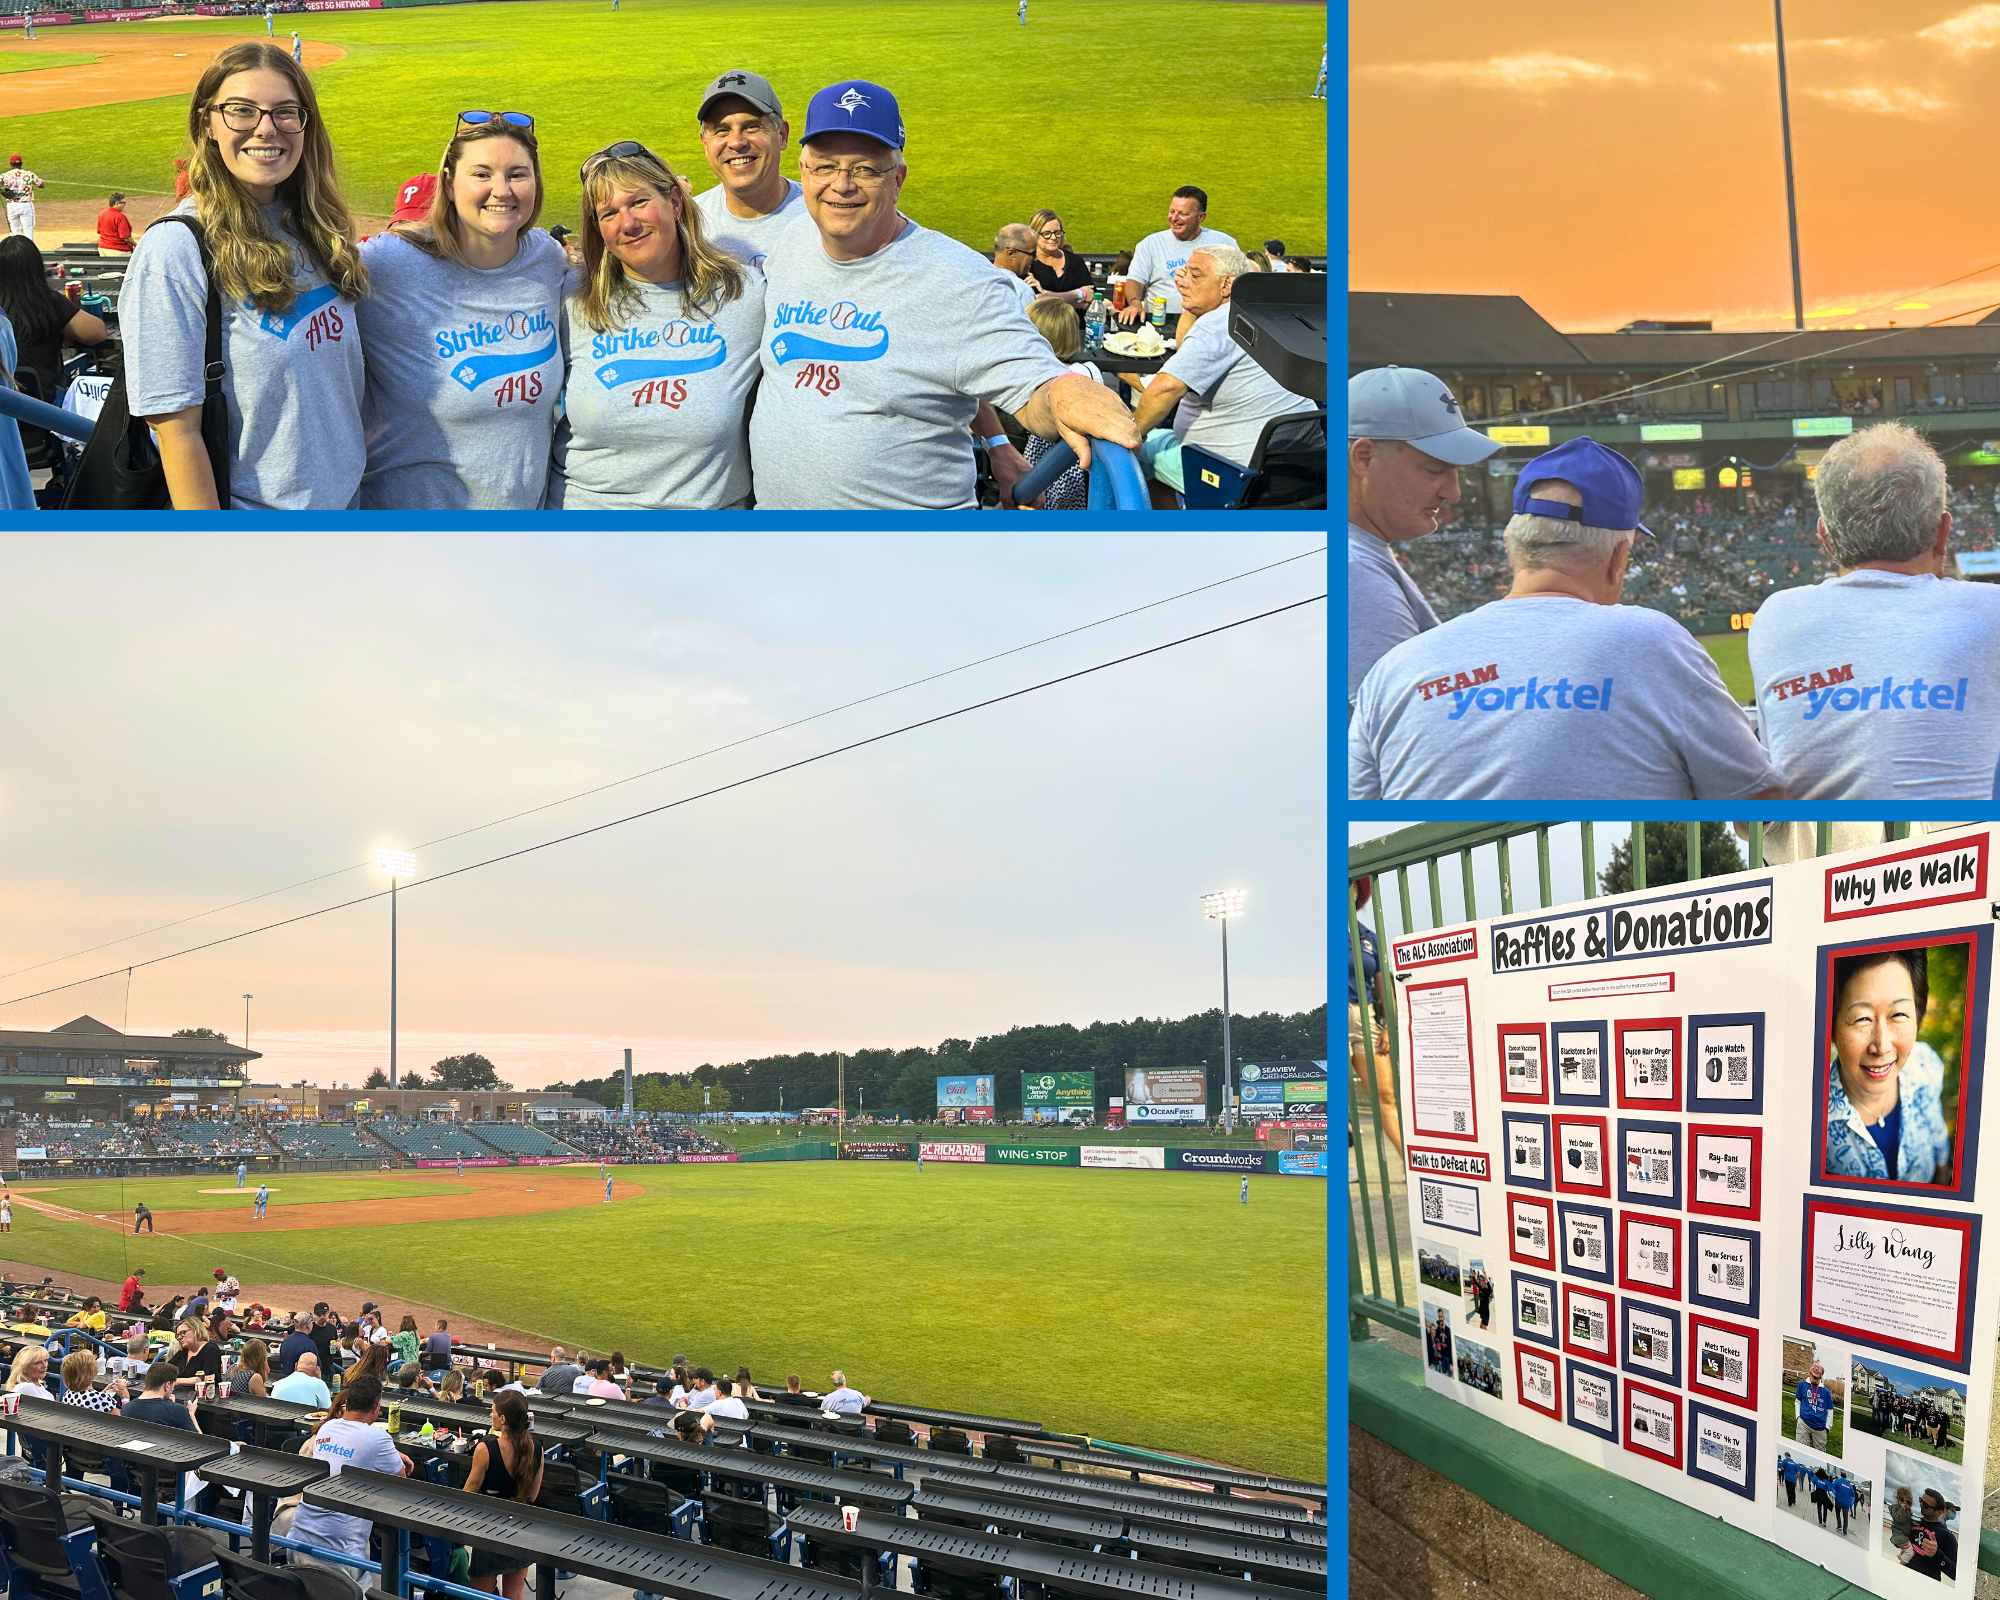 2nd Annual Strike Out ALS Team Yorktel at Jersey Shore BlueClaws